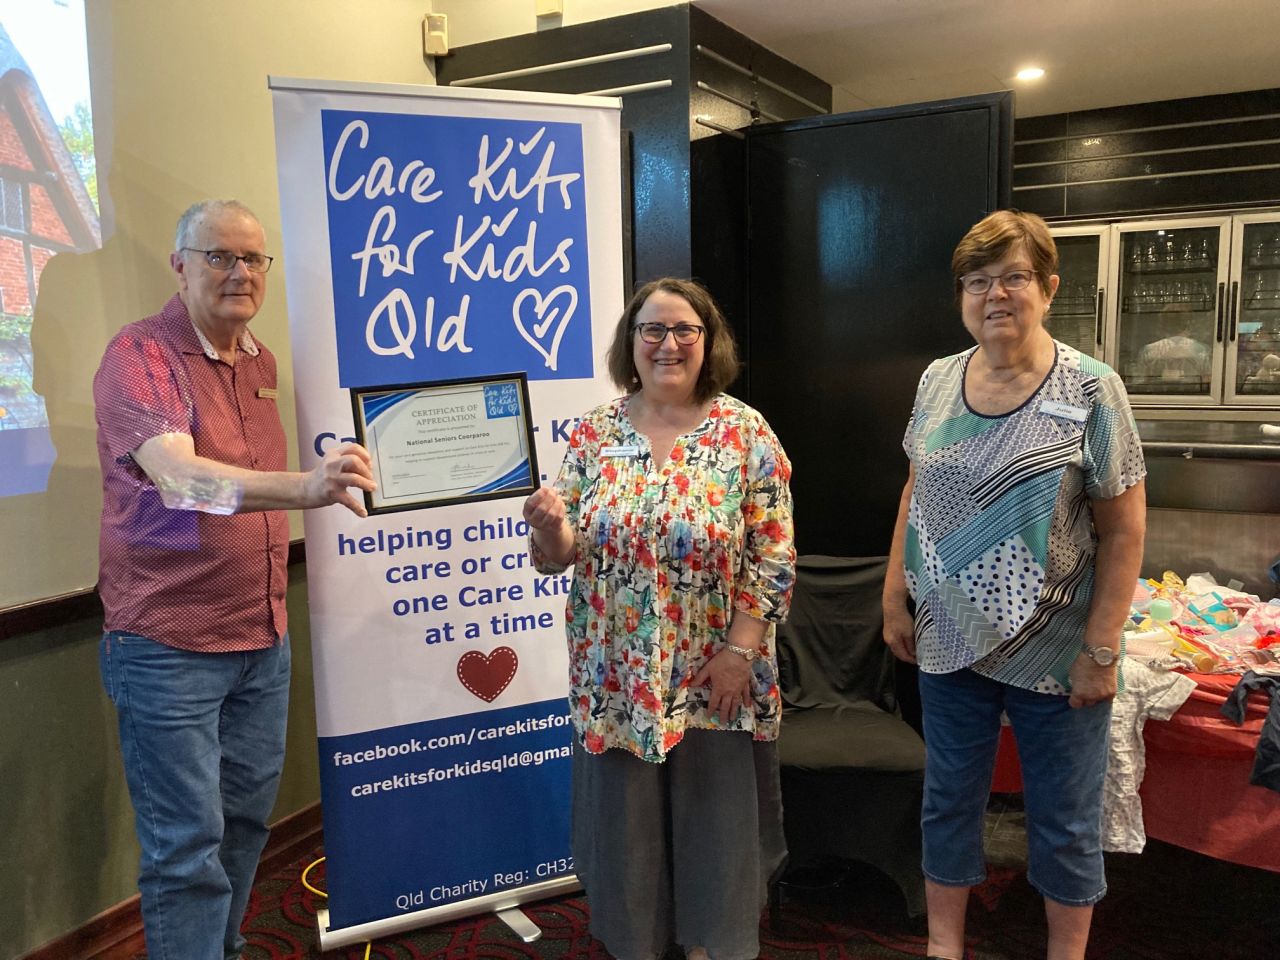 Stephanie Hinrichs and Julie French, Care Kits For Kids Qld Inc - guest speakers at February 2022 Coorparoo Branch meeting